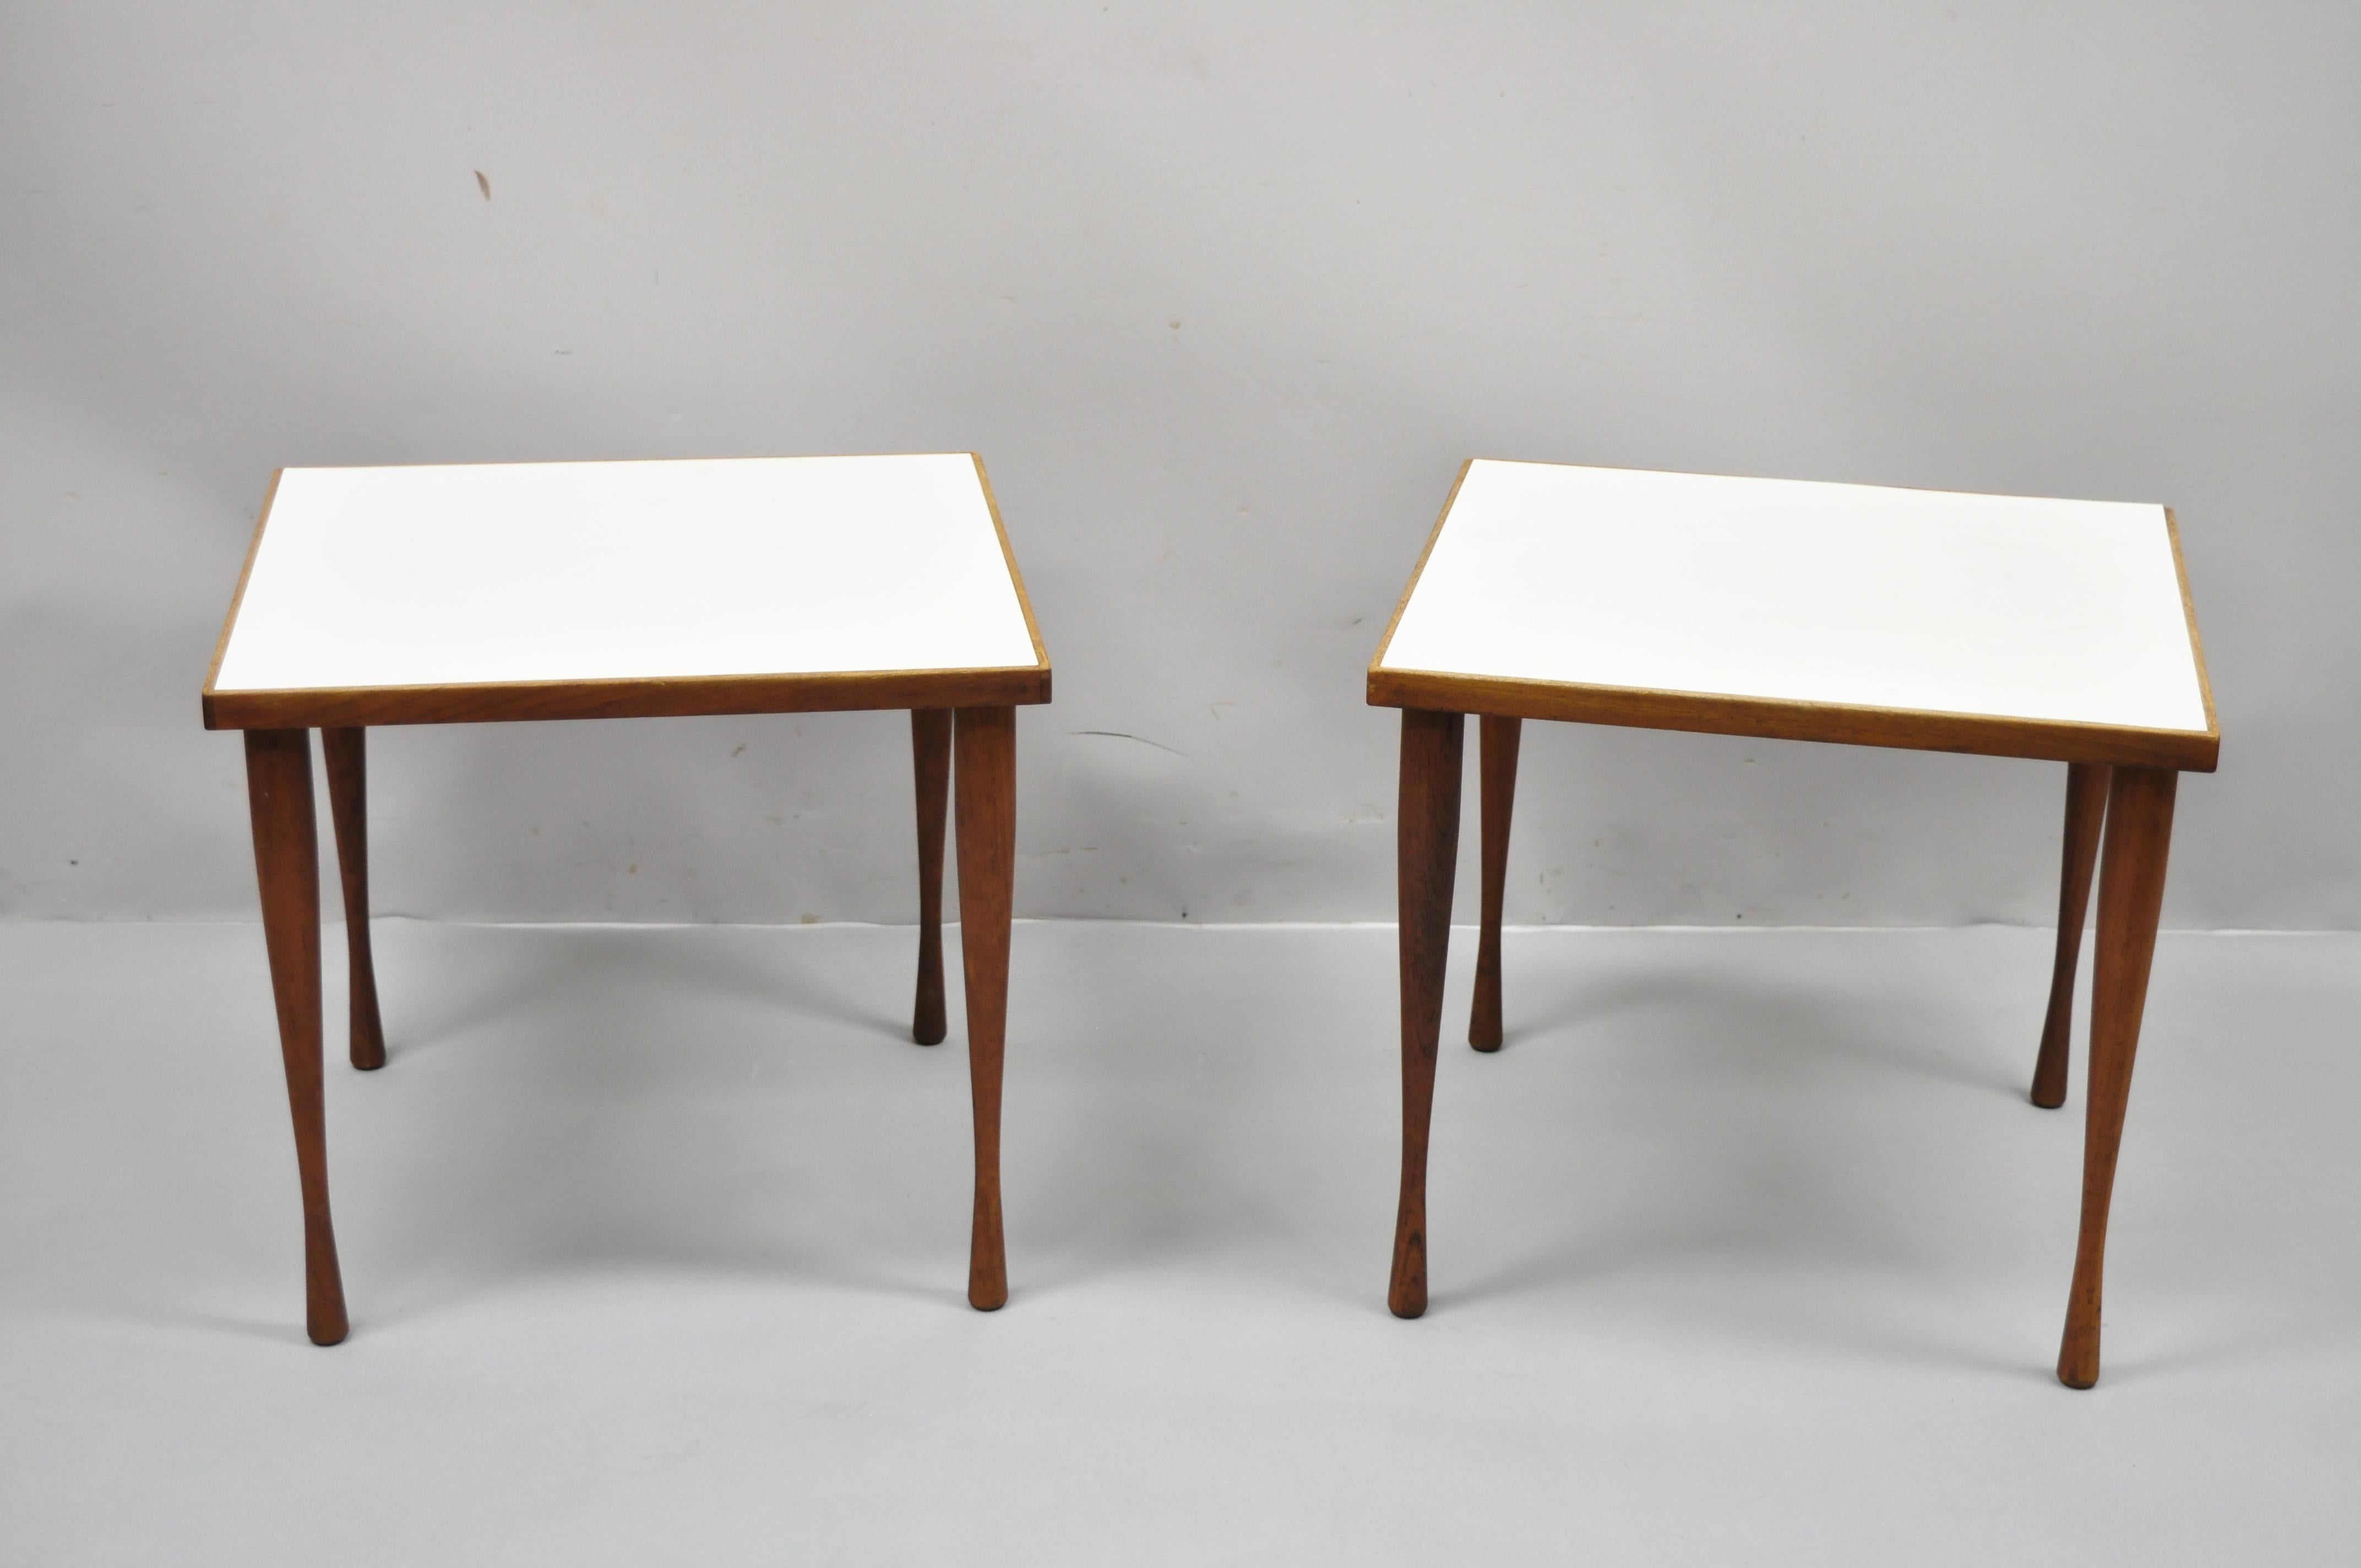 Hans C Andersen Teak Wood White Formica Tapered Hour Glass Snack Tables - a Pair For Sale 4